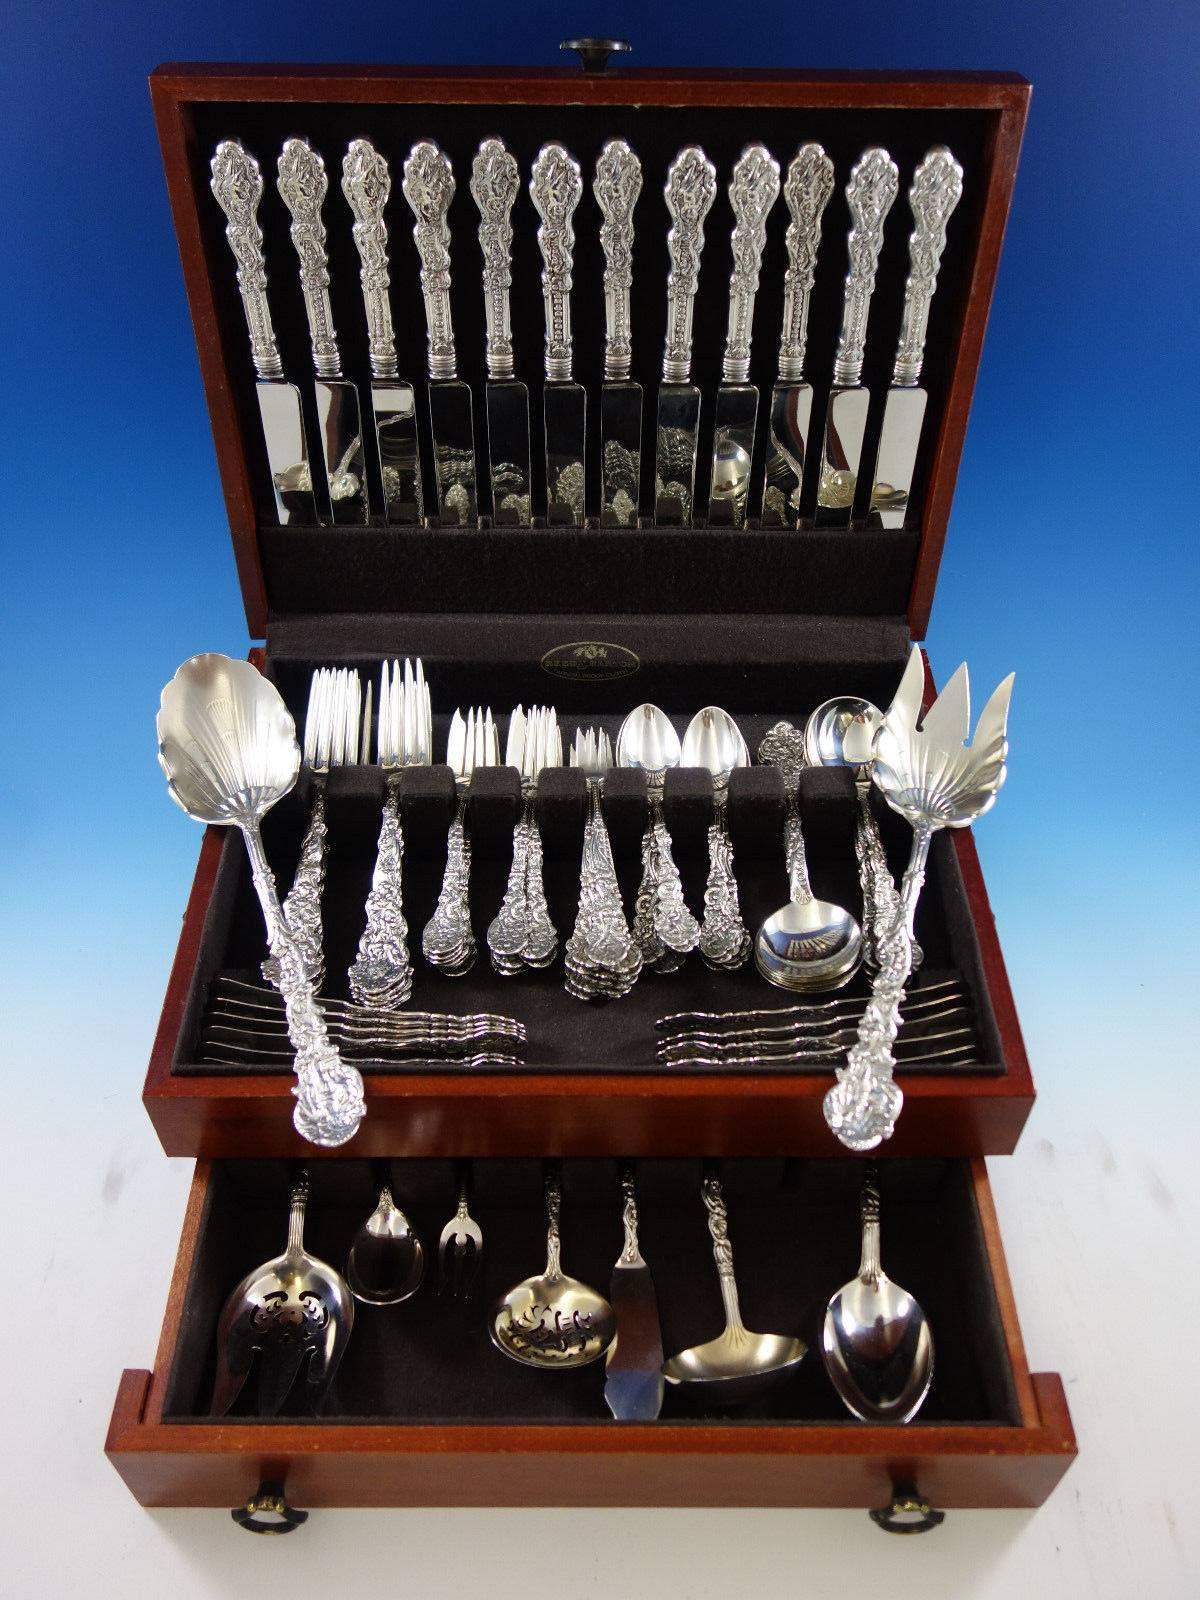 Dinner size multi-motif Versailles by Gorham sterling silver flatware set of 94 pieces. This set includes: 12 dinner size knives, 9 7/8